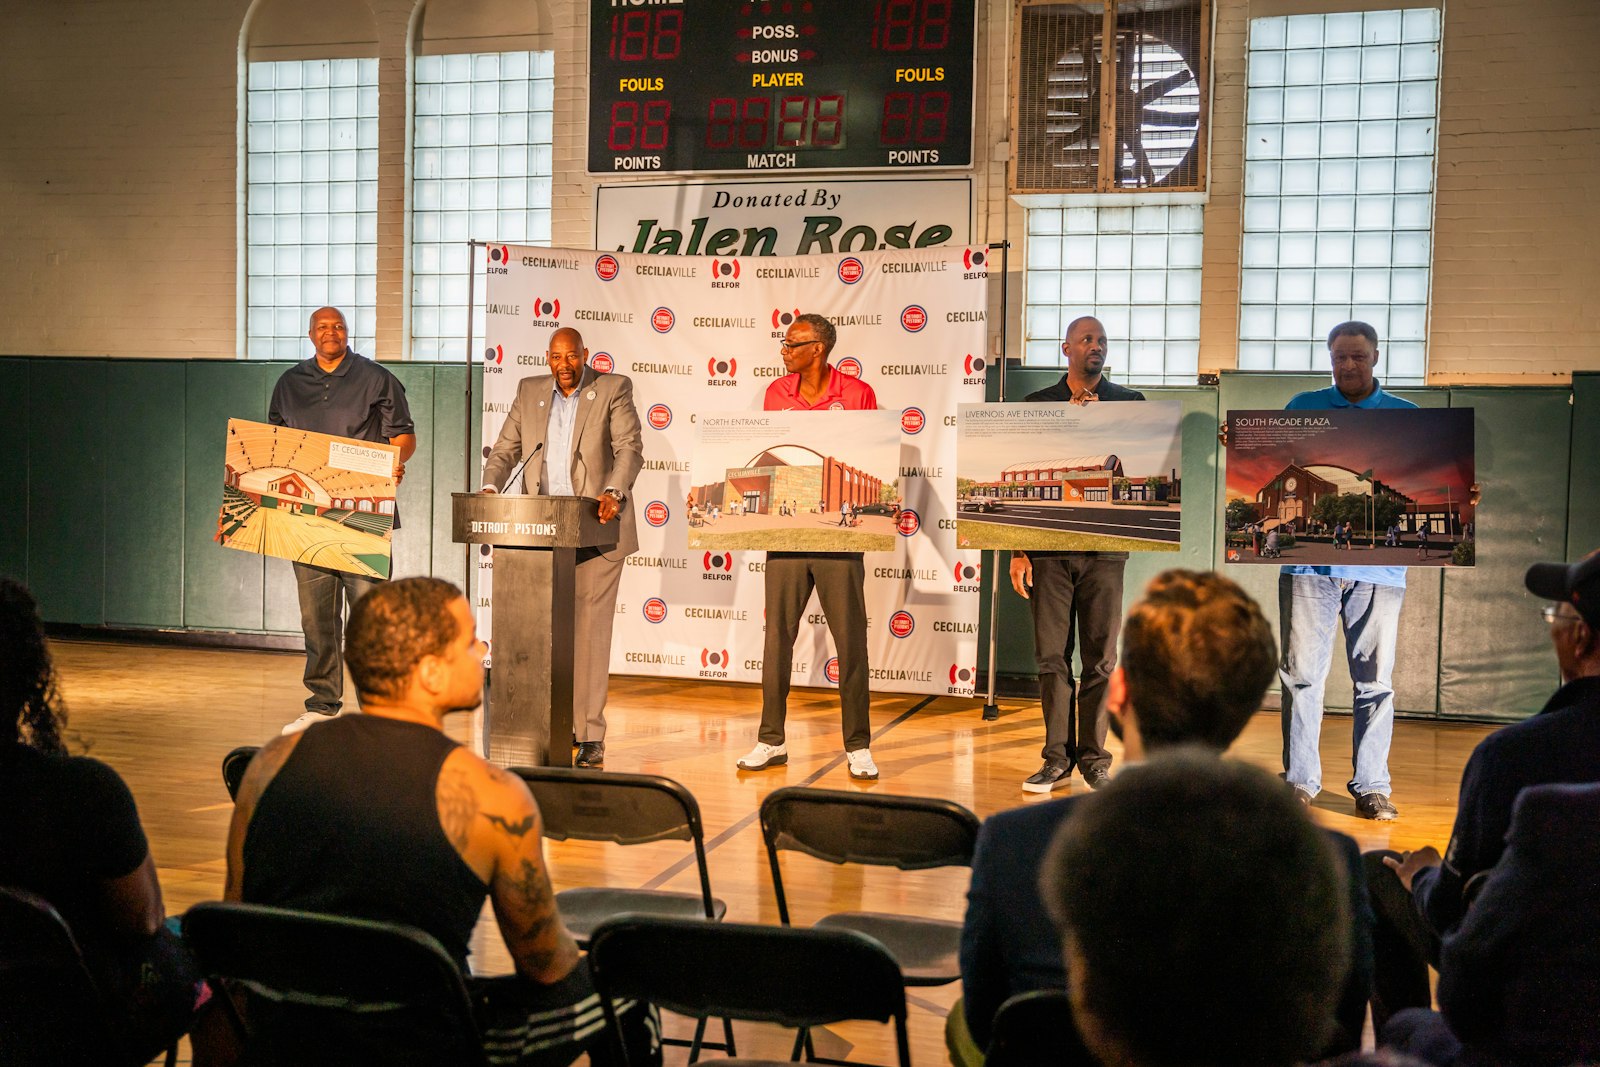 Derrick Coleman, Greg Kelser, Derrick Long and Charlie Edge hold up renderings of what Ceciliaville will look like after renovations while Earl “The Twirl” Cureton speaks at the podium during the Oct. 4, 2023 event.